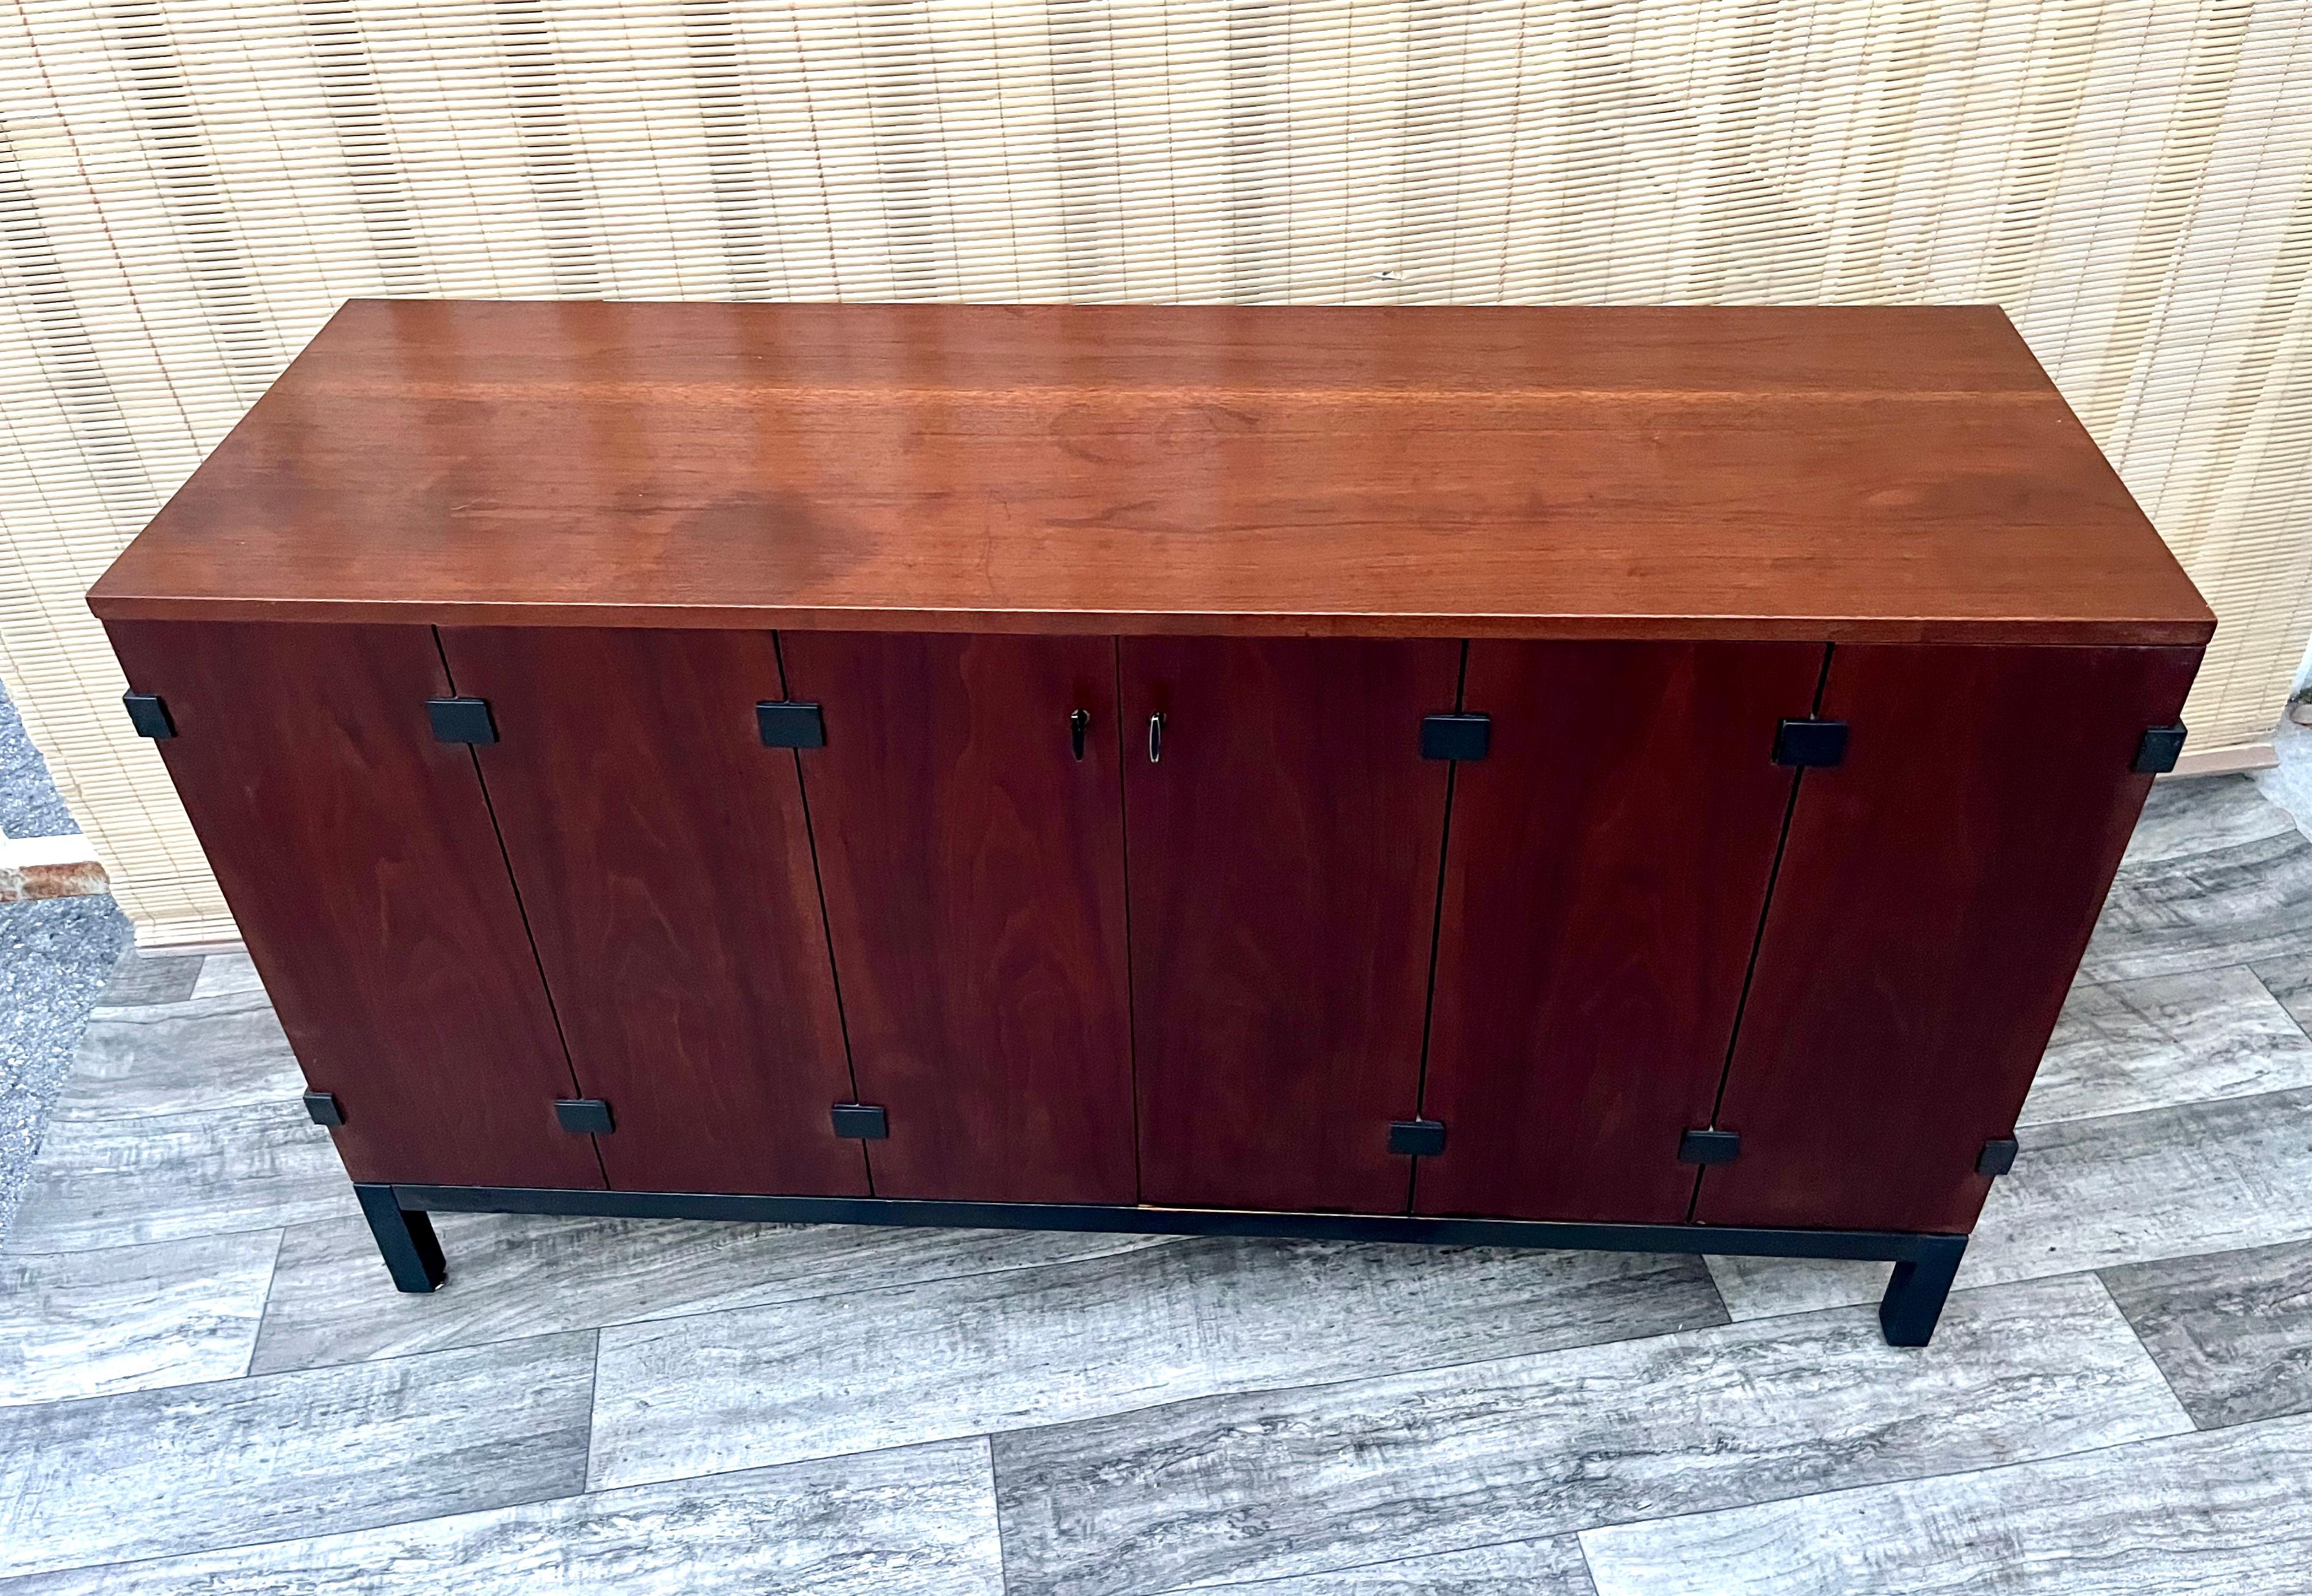 Mid Century Sideboard Credenza by Milo Baughman for Directional. Circa 1960s
Features a sleek Mid Century Modern Design with a beautiful walnut woodgrain, two trifold doors with flat black hardware, two side cabinets with adjustable shelves, and